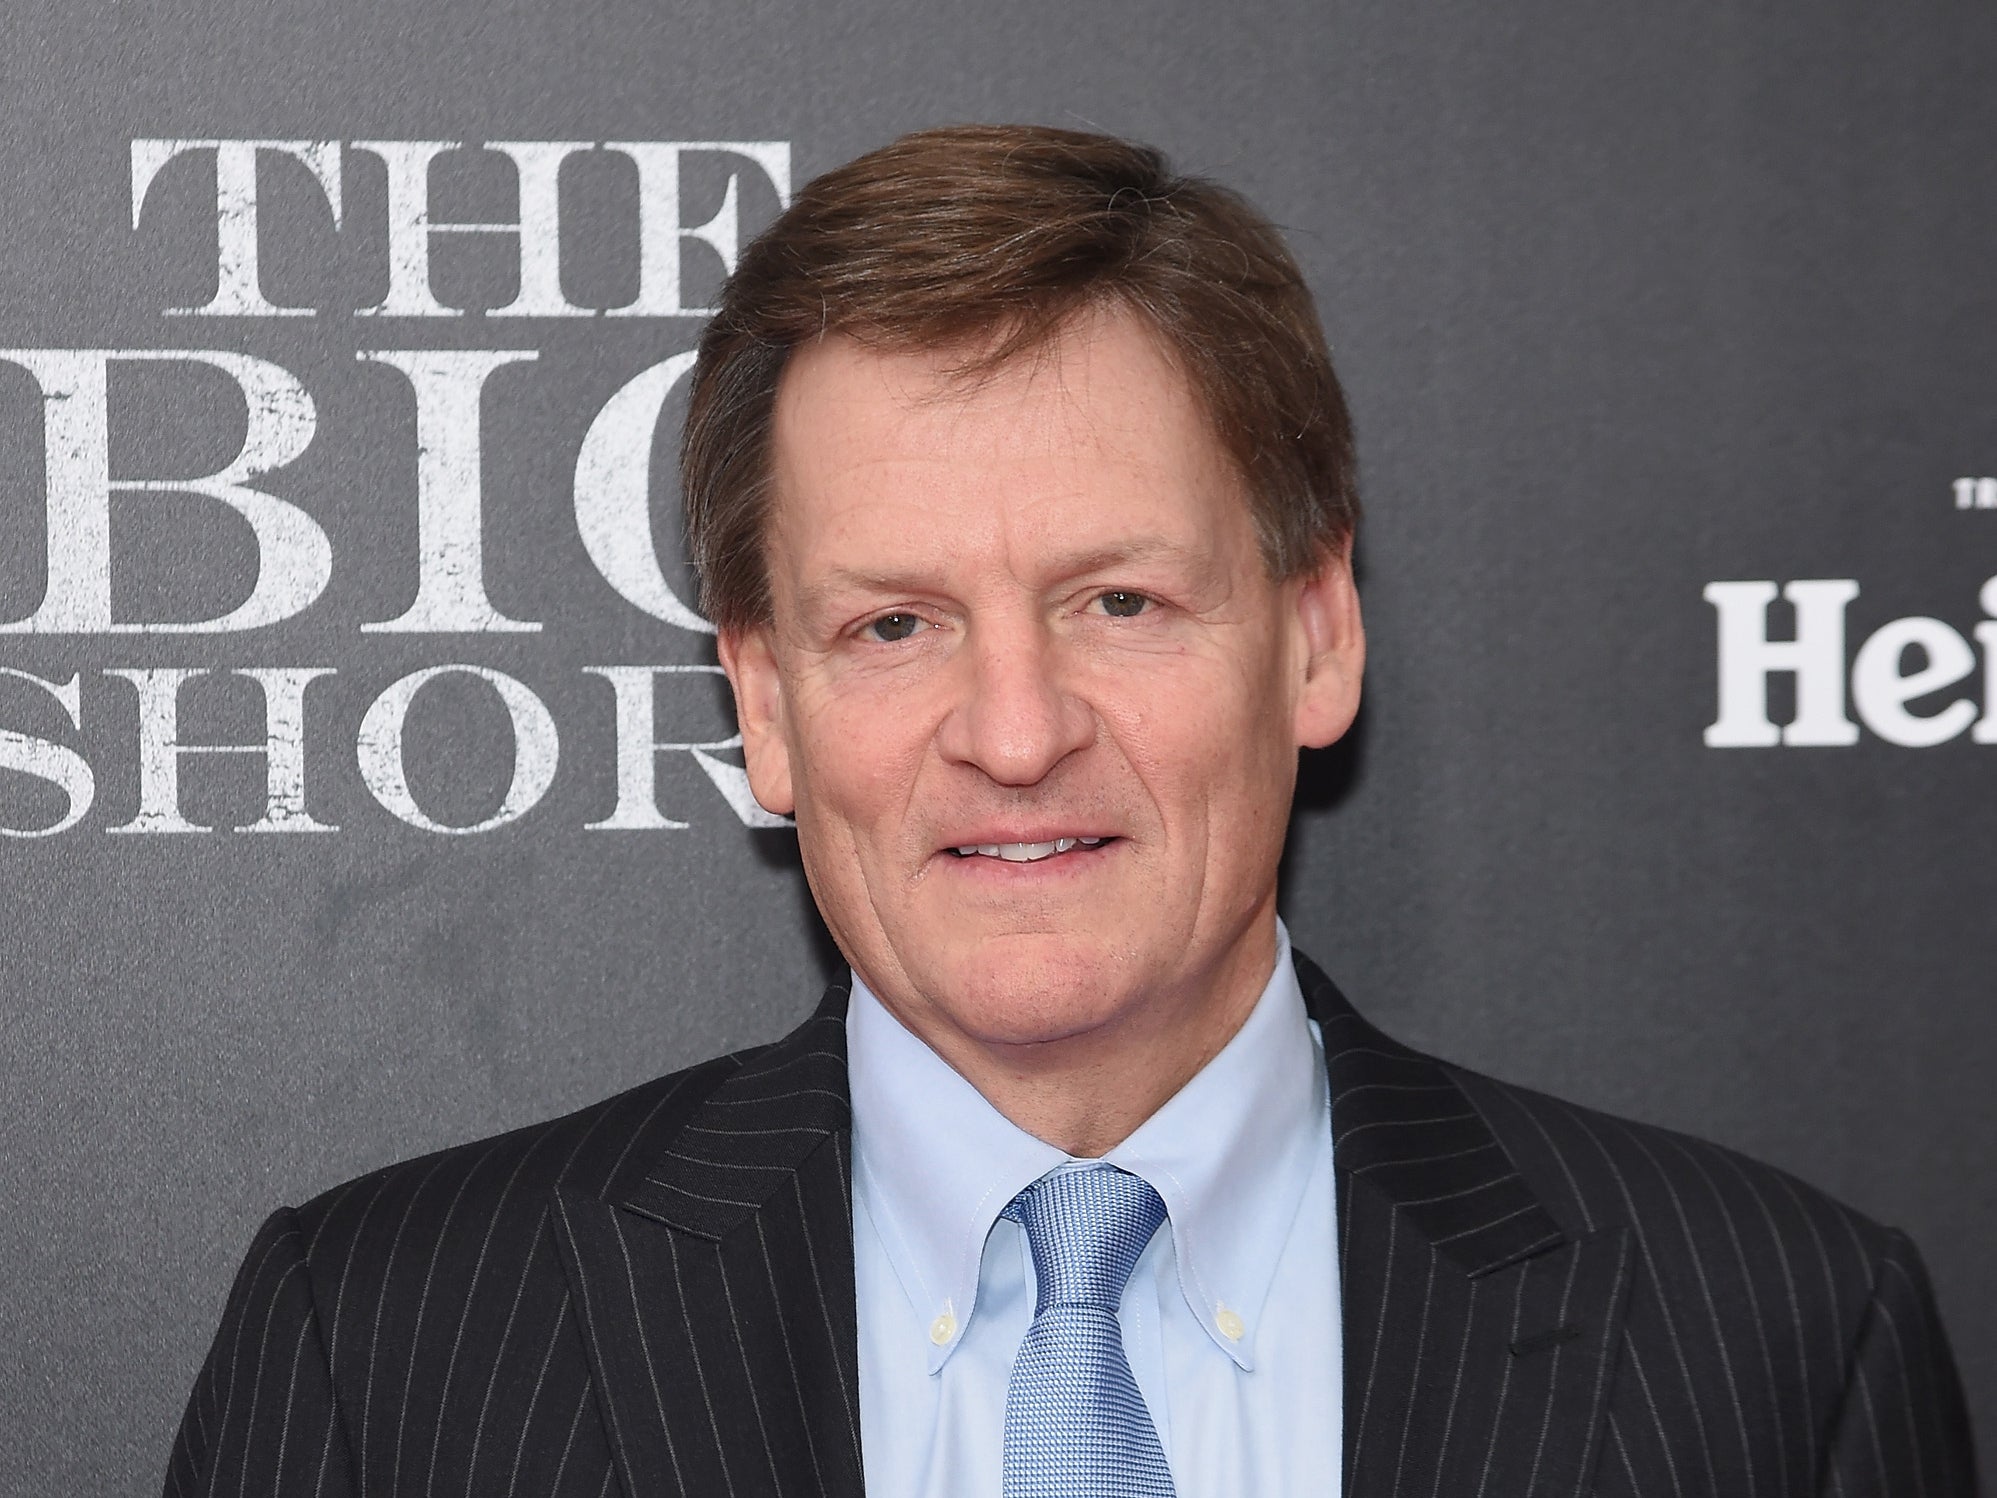 Author Michael Lewis attends the premiere of ‘The Big Short’ at Ziegfeld Theatre on 23 November 2015 in New York City